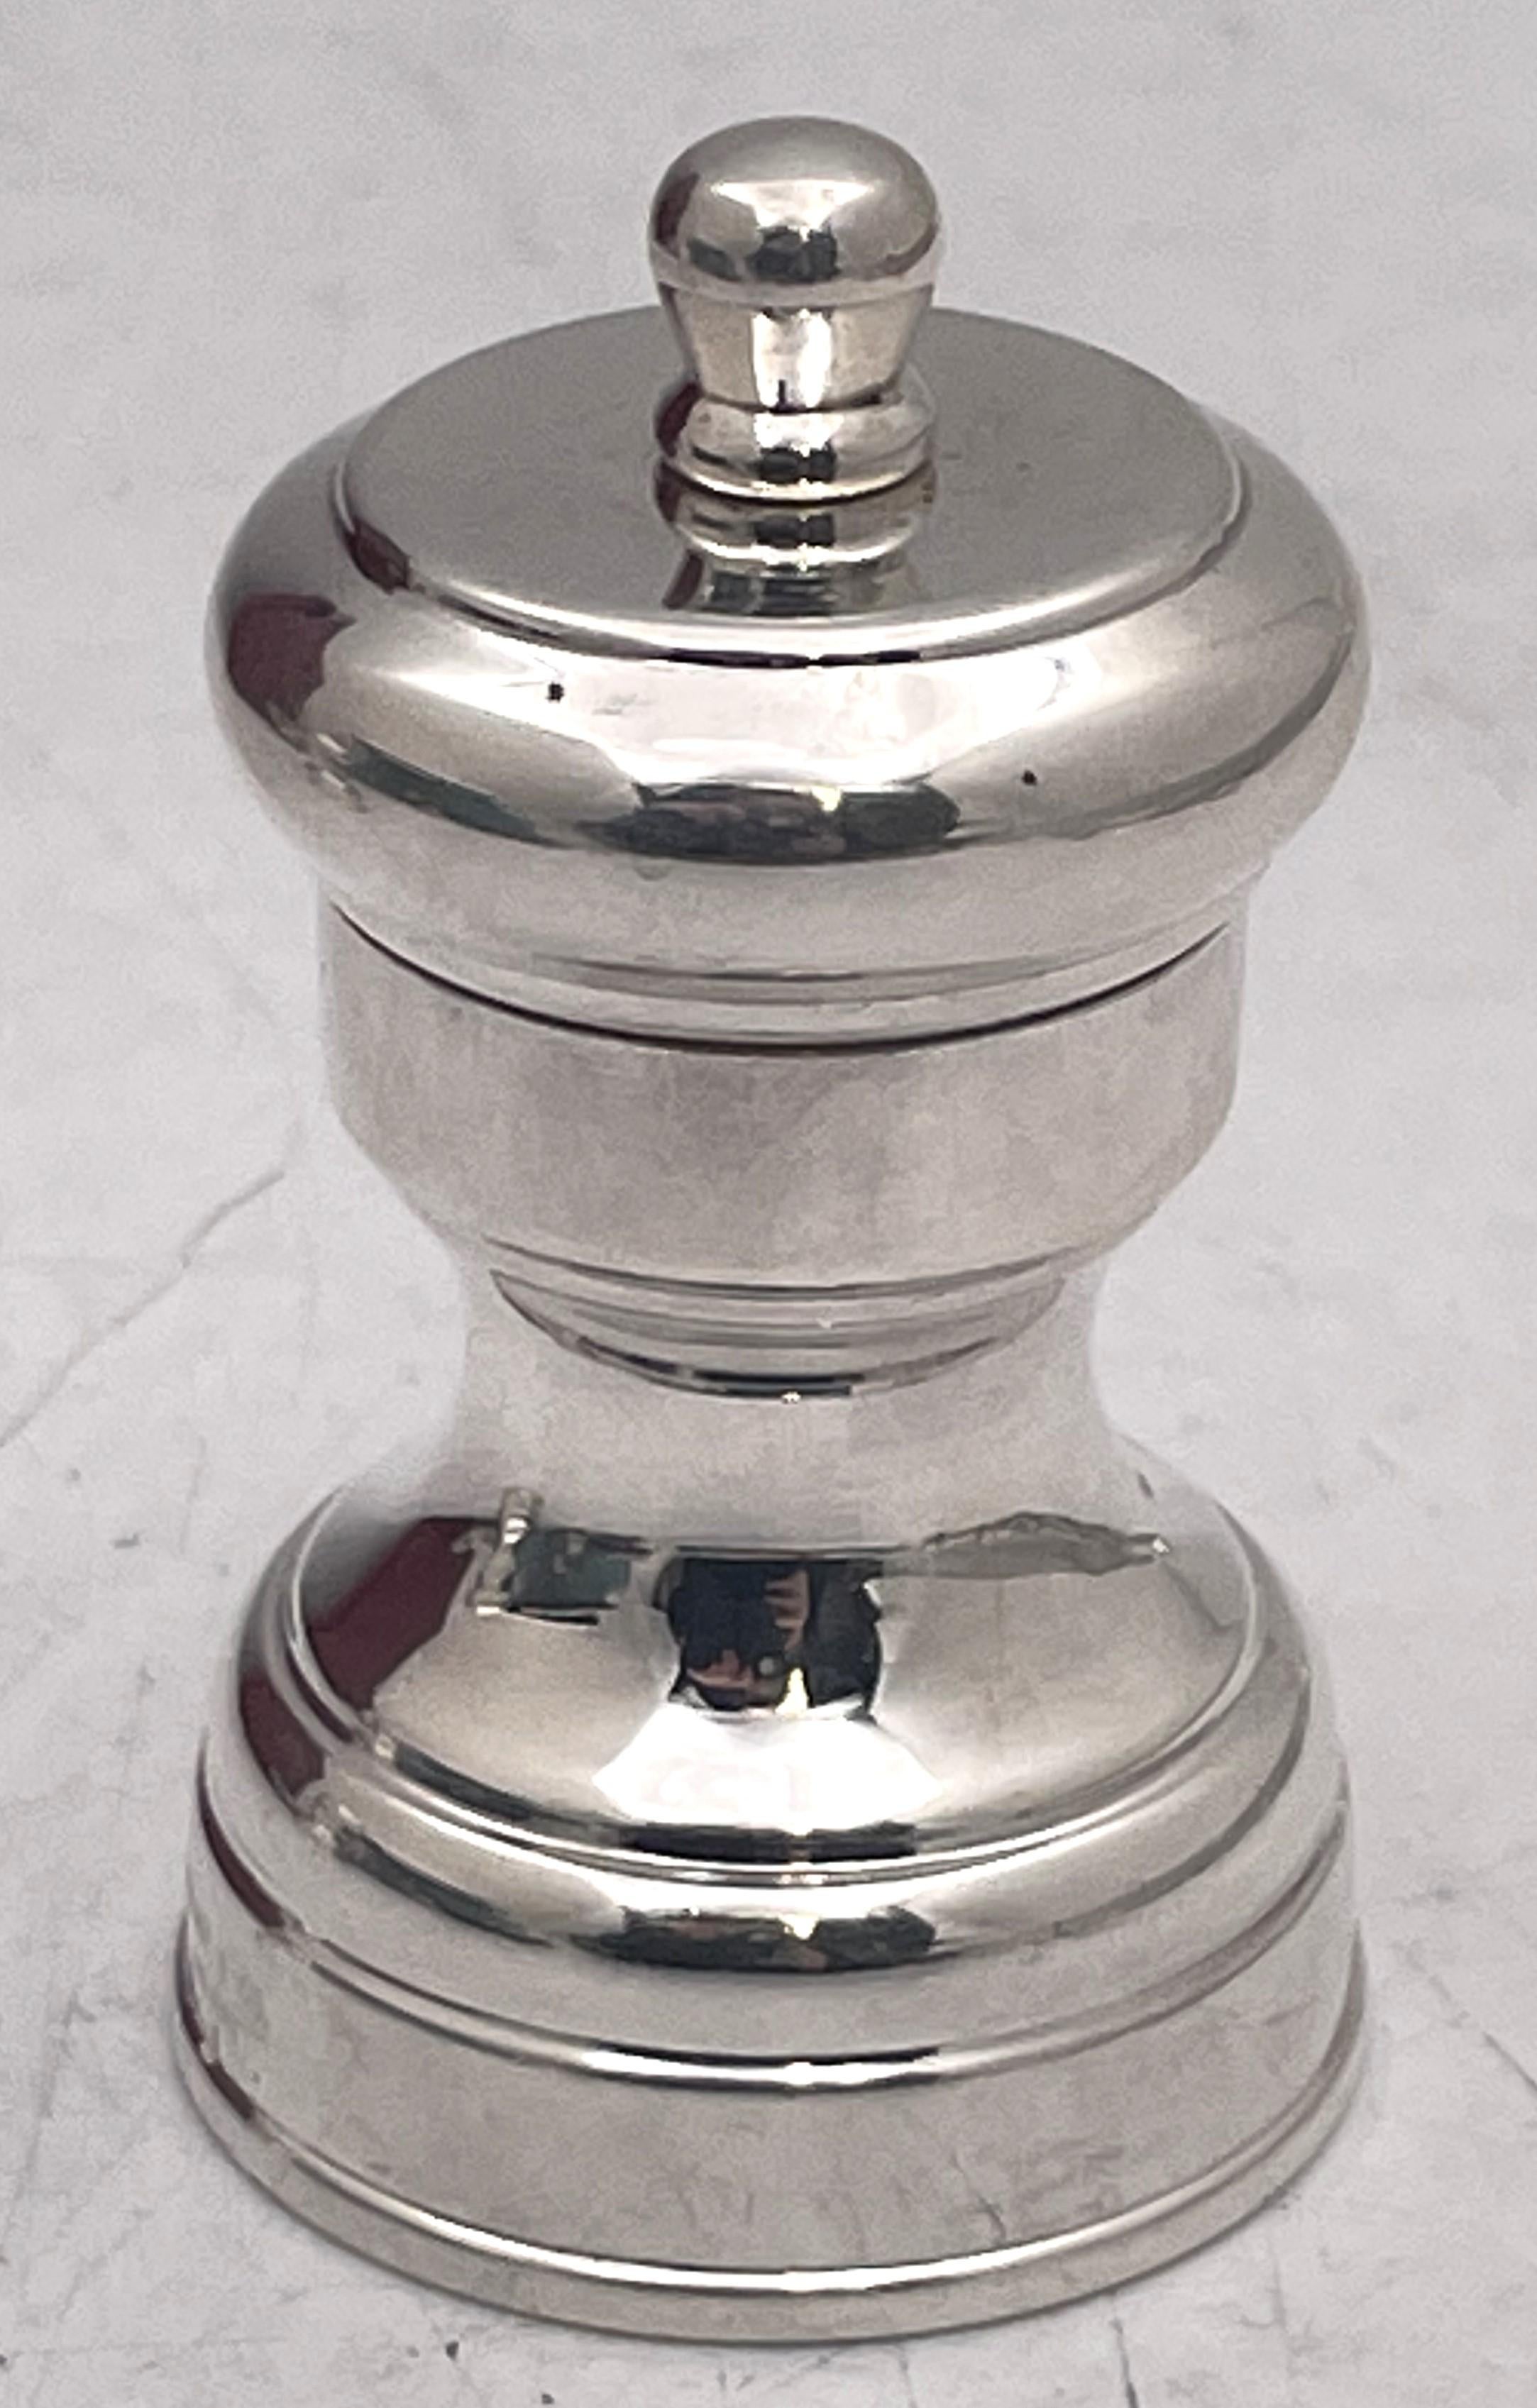 Pair of Tiffany & Co. sterling silver saltshaker and pepper grinder, made in Italy in the 20th century, and in Mid-Century Modern Style, with an elegant, geometric design. The pepper grinder measures 2 1/2'' in height by 1 2/3'' in diameter while